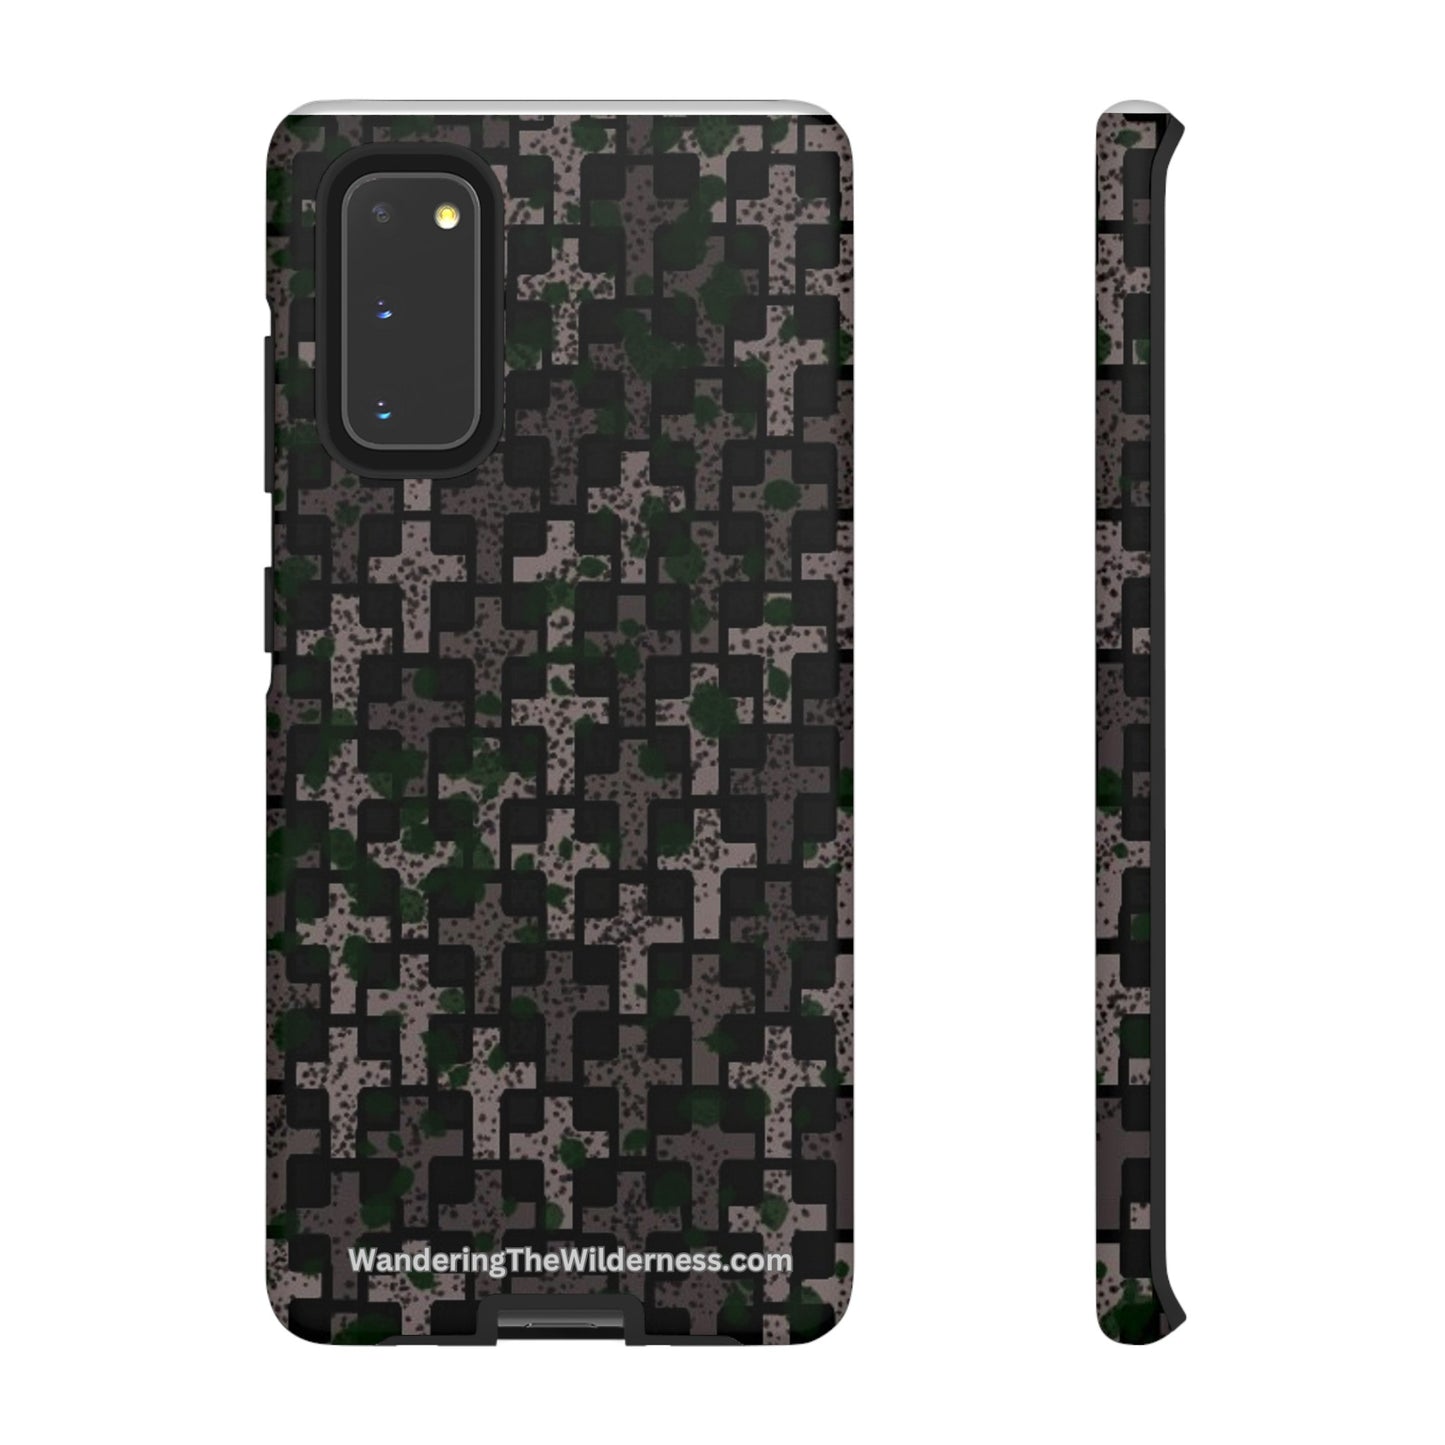 Wandering the Wilderness Crow Holler Camo Tough Cases